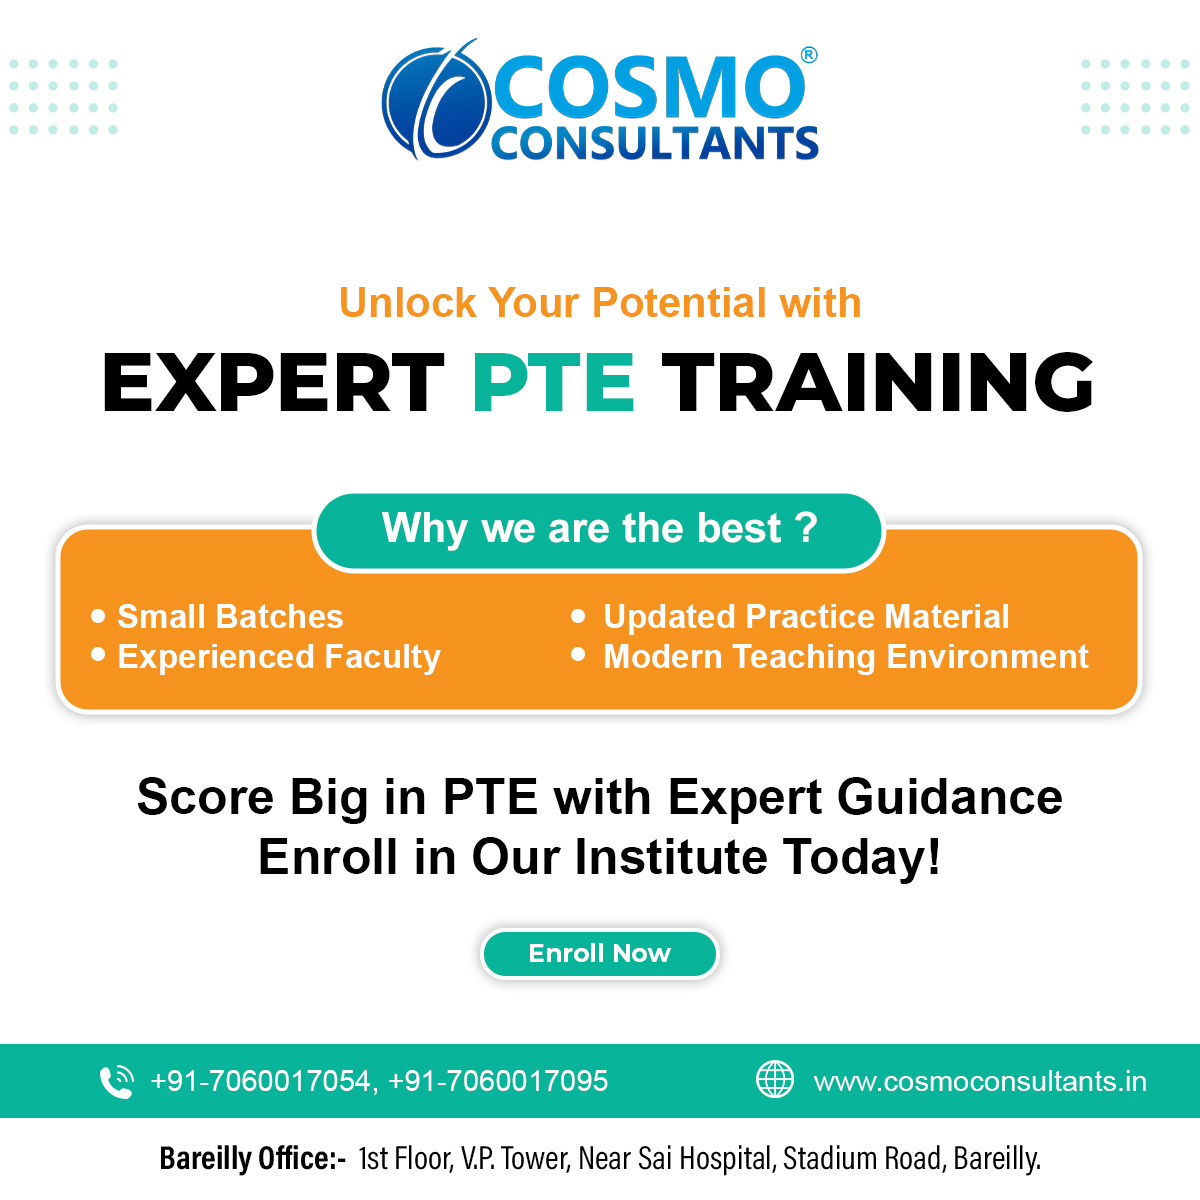 Crack PTE with Confidence! Join Our Proven Institute Today.
For more information reach us: +91-7060017054, +91-7060017095.

#CosmoConsultants #pte #PTEInstitute #PTEClasses #PTECoaching #PTEexam #PTETips #PTEResult #PTEPreparation #PTETricks